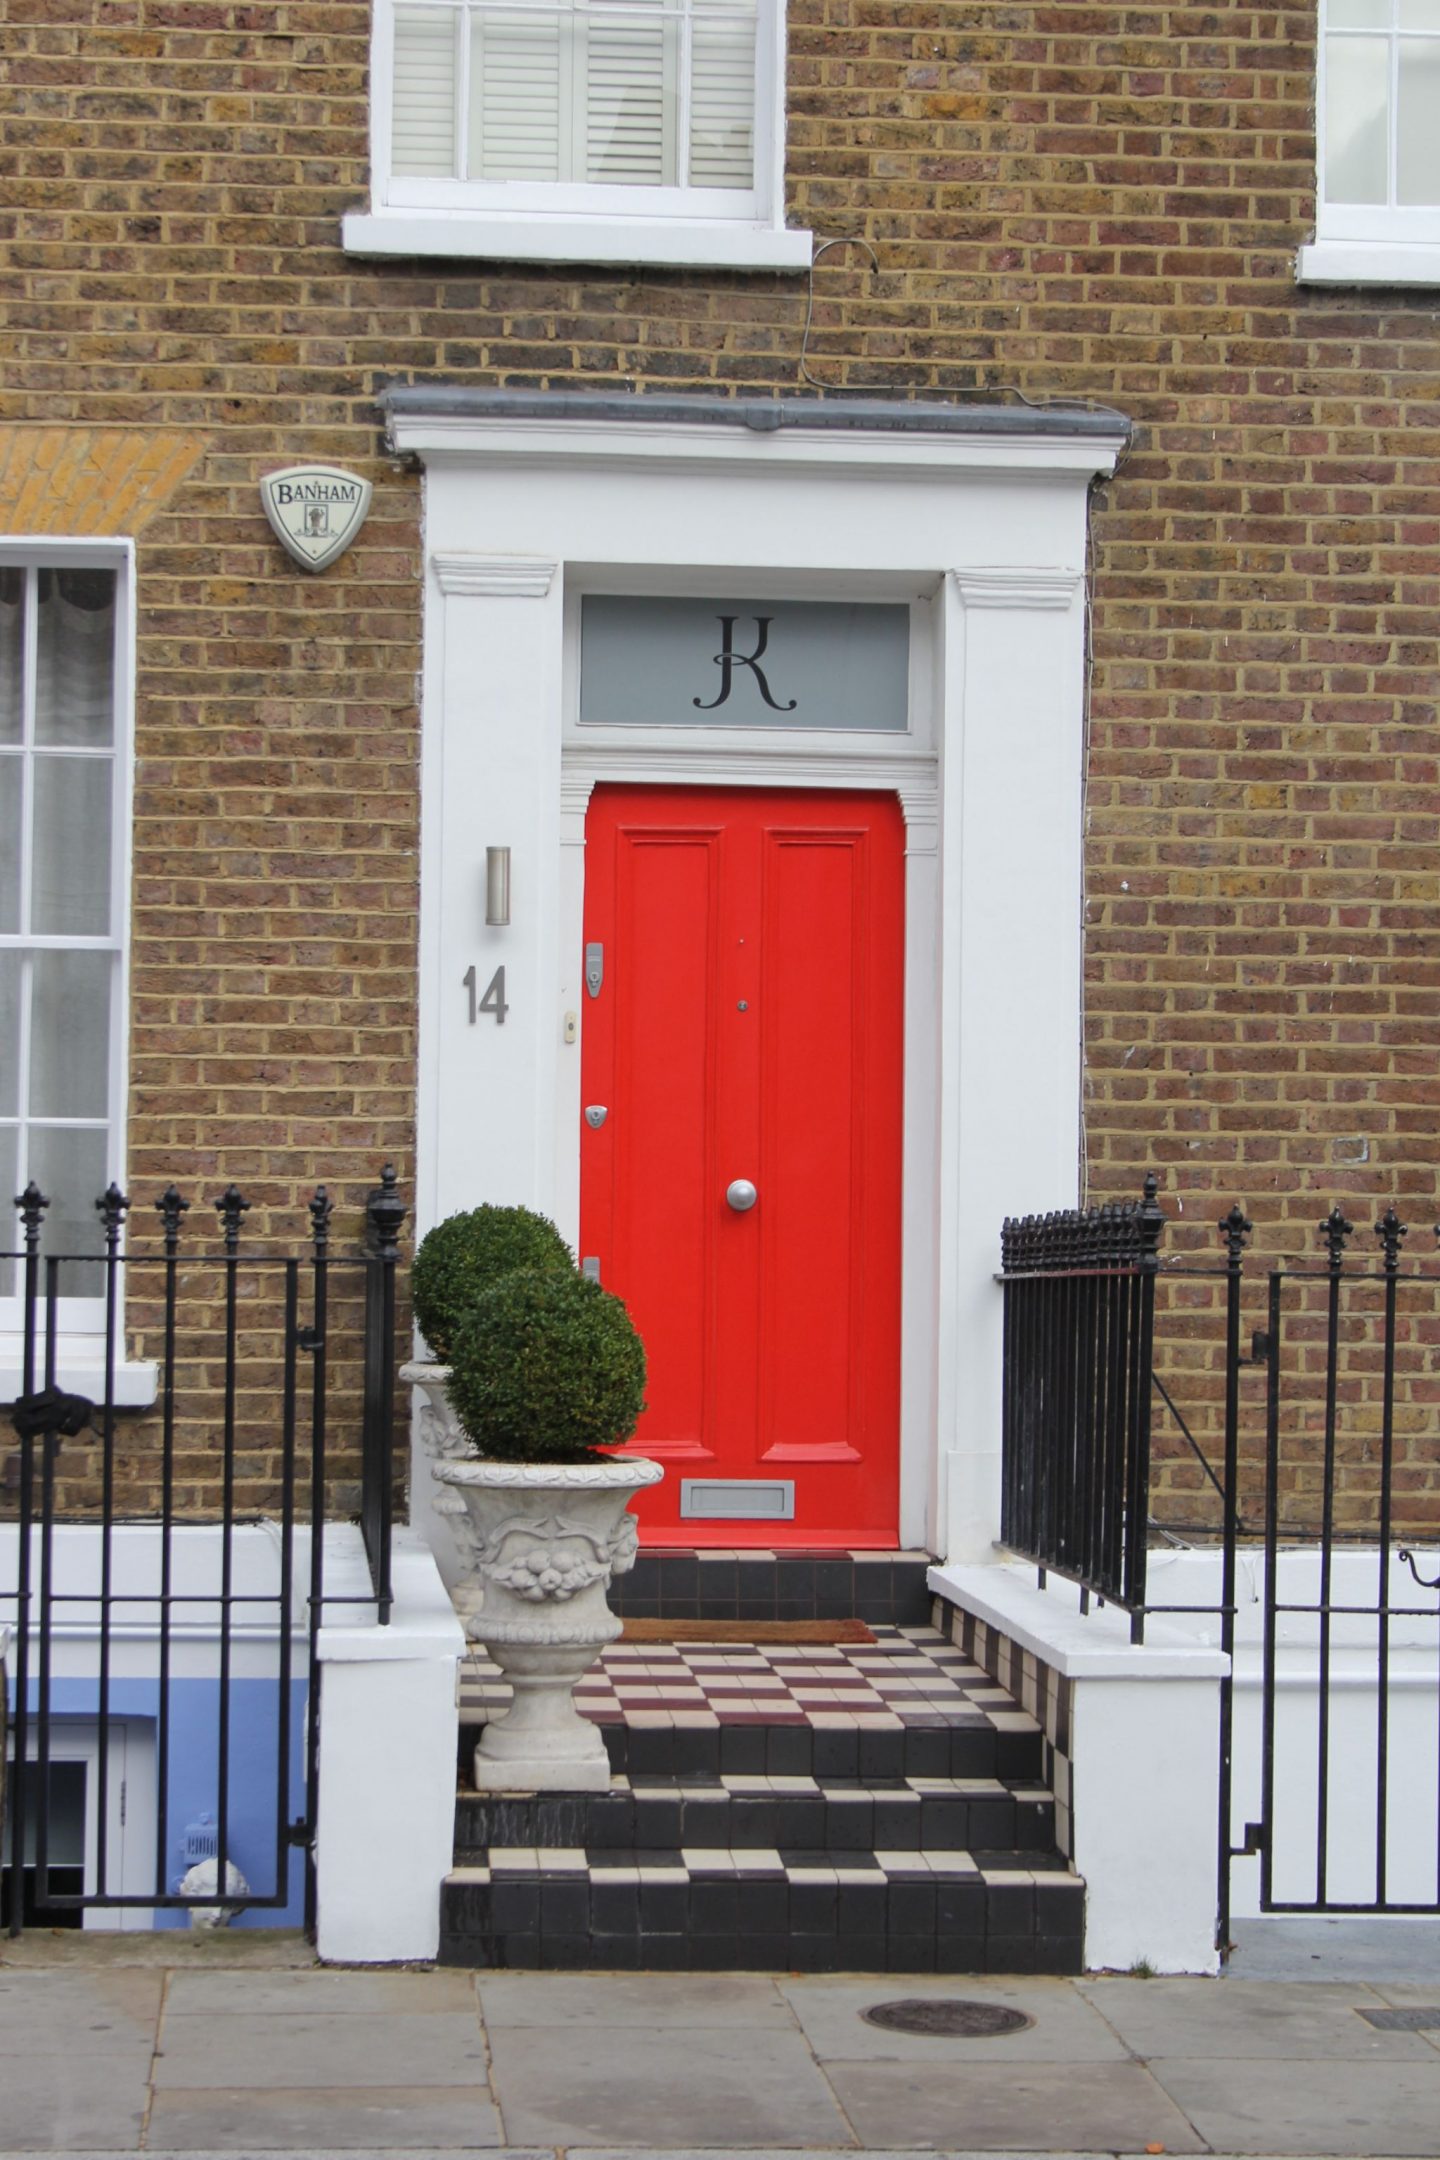 Elegant black and red front doors, Greater London, England, UK